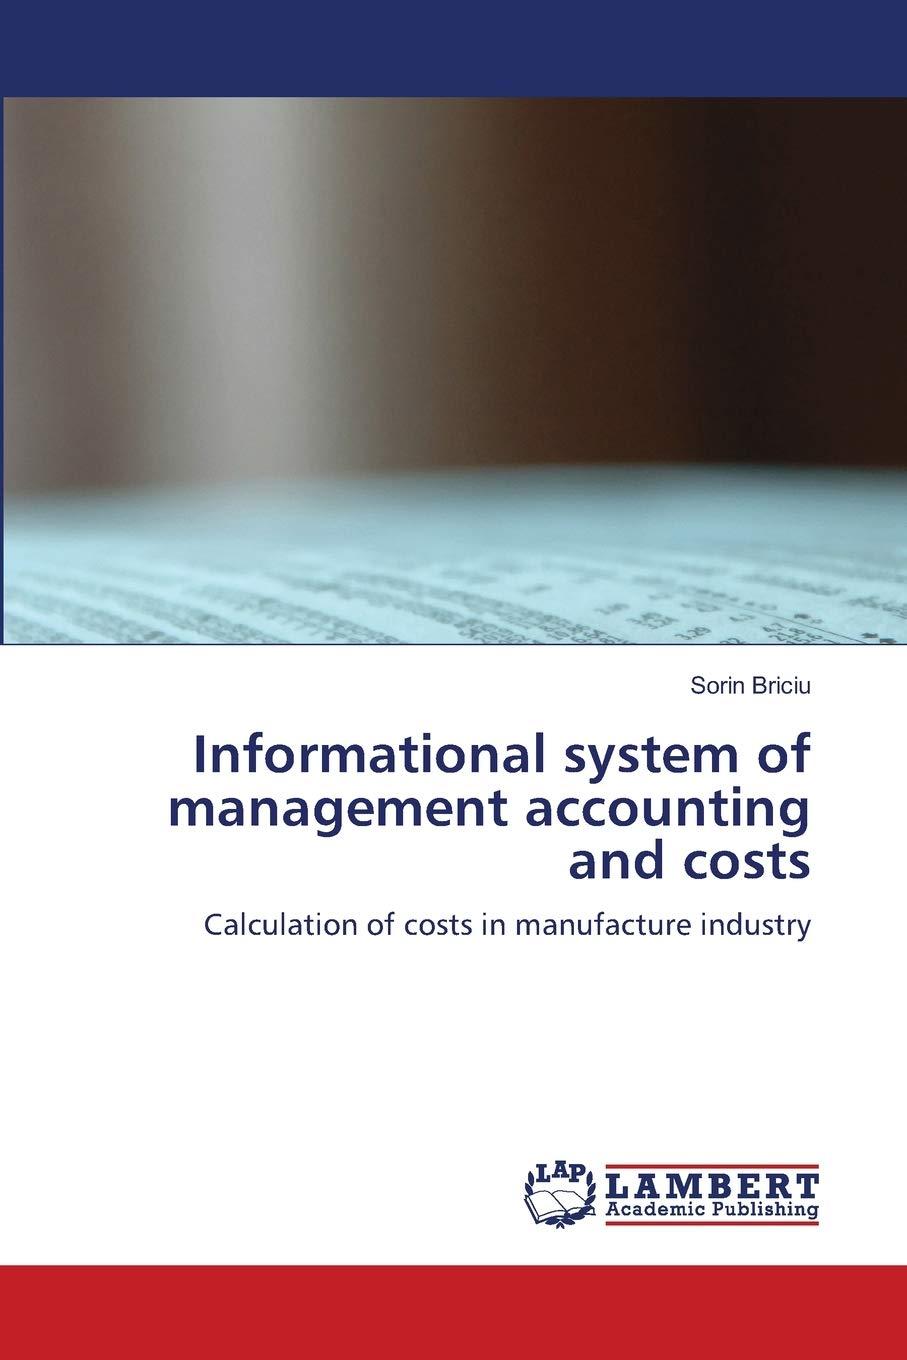 informational system of management accounting and costs 1st edition sorin briciu 3848403870, 9783848403875